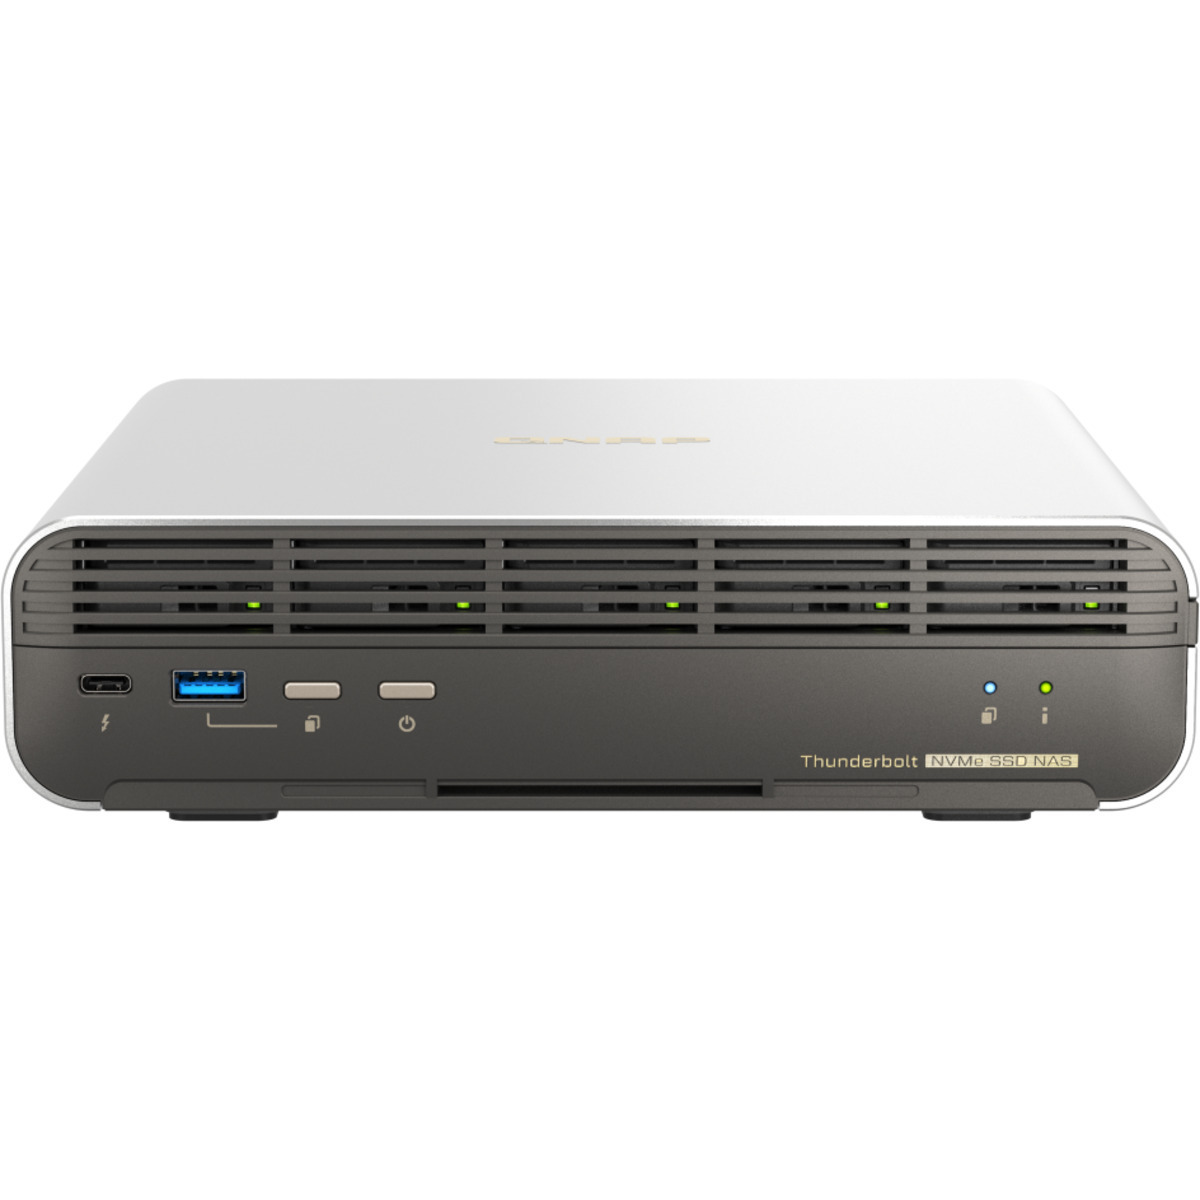 QNAP TBS-h574TX Core i3 Thunderbolt 4 20tb 5-Bay Desktop Multimedia / Power User / Business DAS-NAS - Combo Direct + Network Storage Device 5x4tb Sabrent Rocket 5 SB-RKT5-4TB  14000/12000MB/s M.2 2280 NVMe SSD CONSUMER Class Drives Installed - Burn-In Tested TBS-h574TX Core i3 Thunderbolt 4